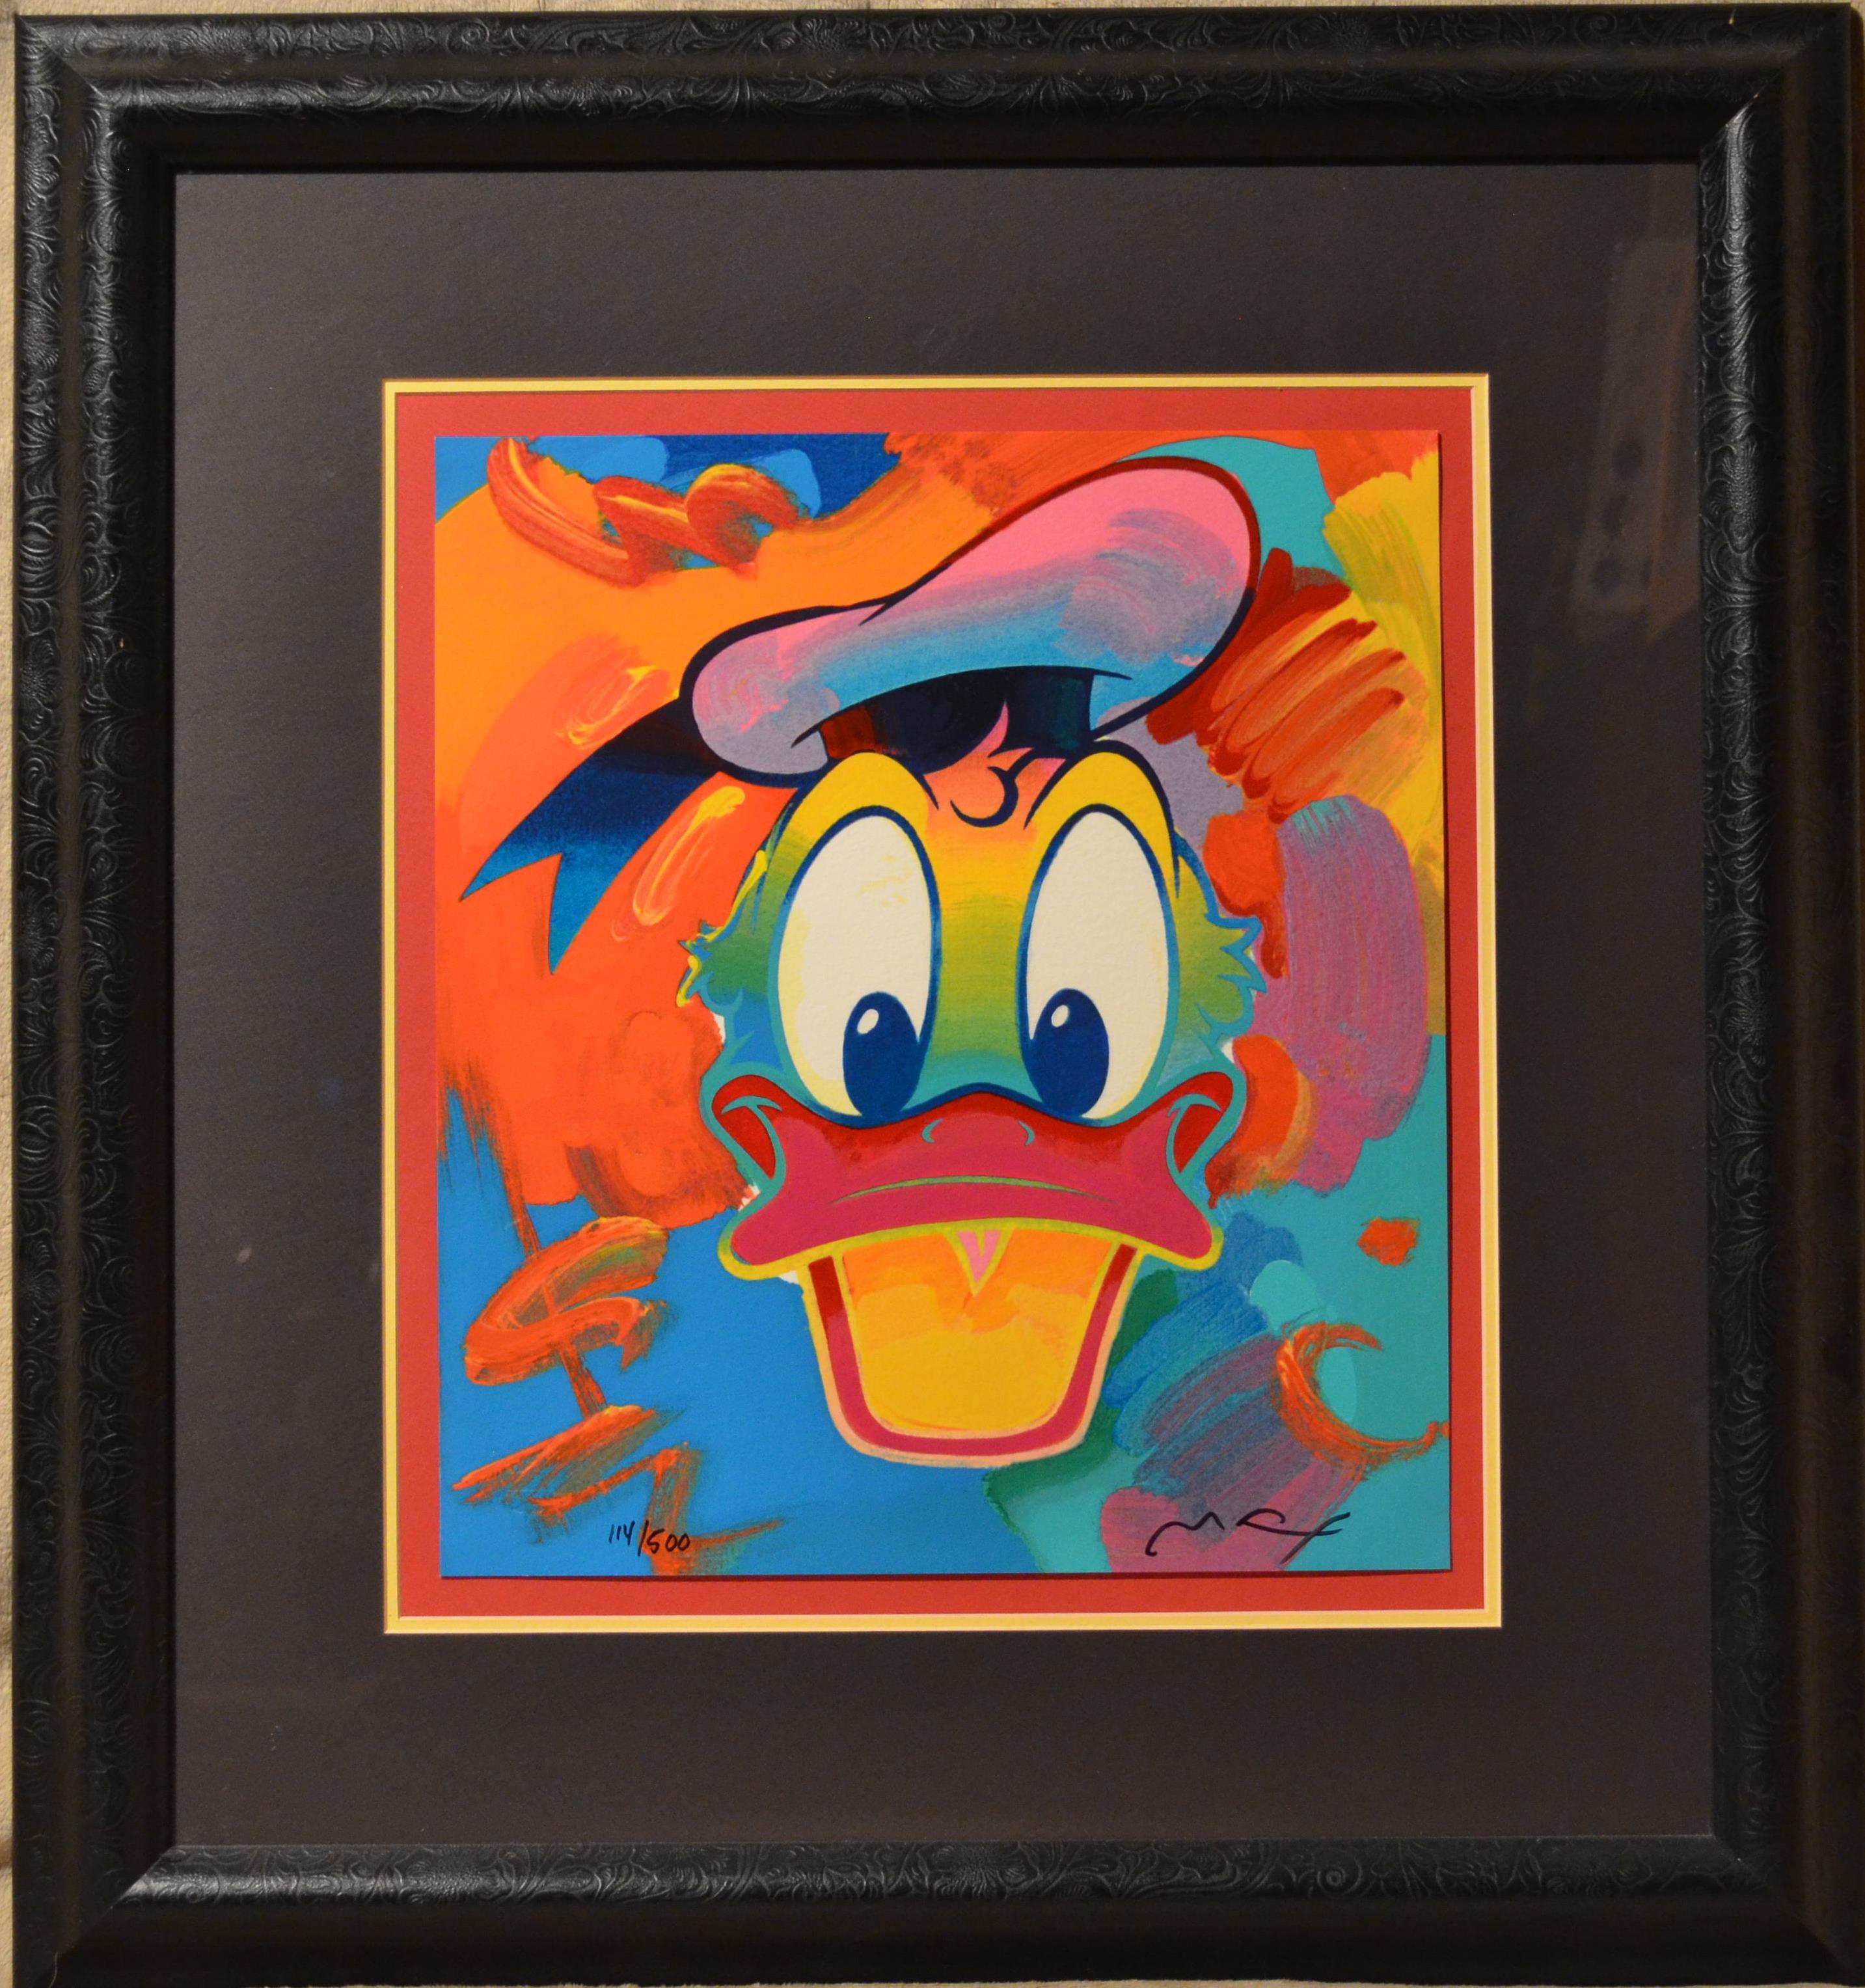 -- Artwork comes with a certificate of authenticity for the suite
-- Signed and numbered by Peter Max
--Limited Edition Lithograph, Edition 114/500